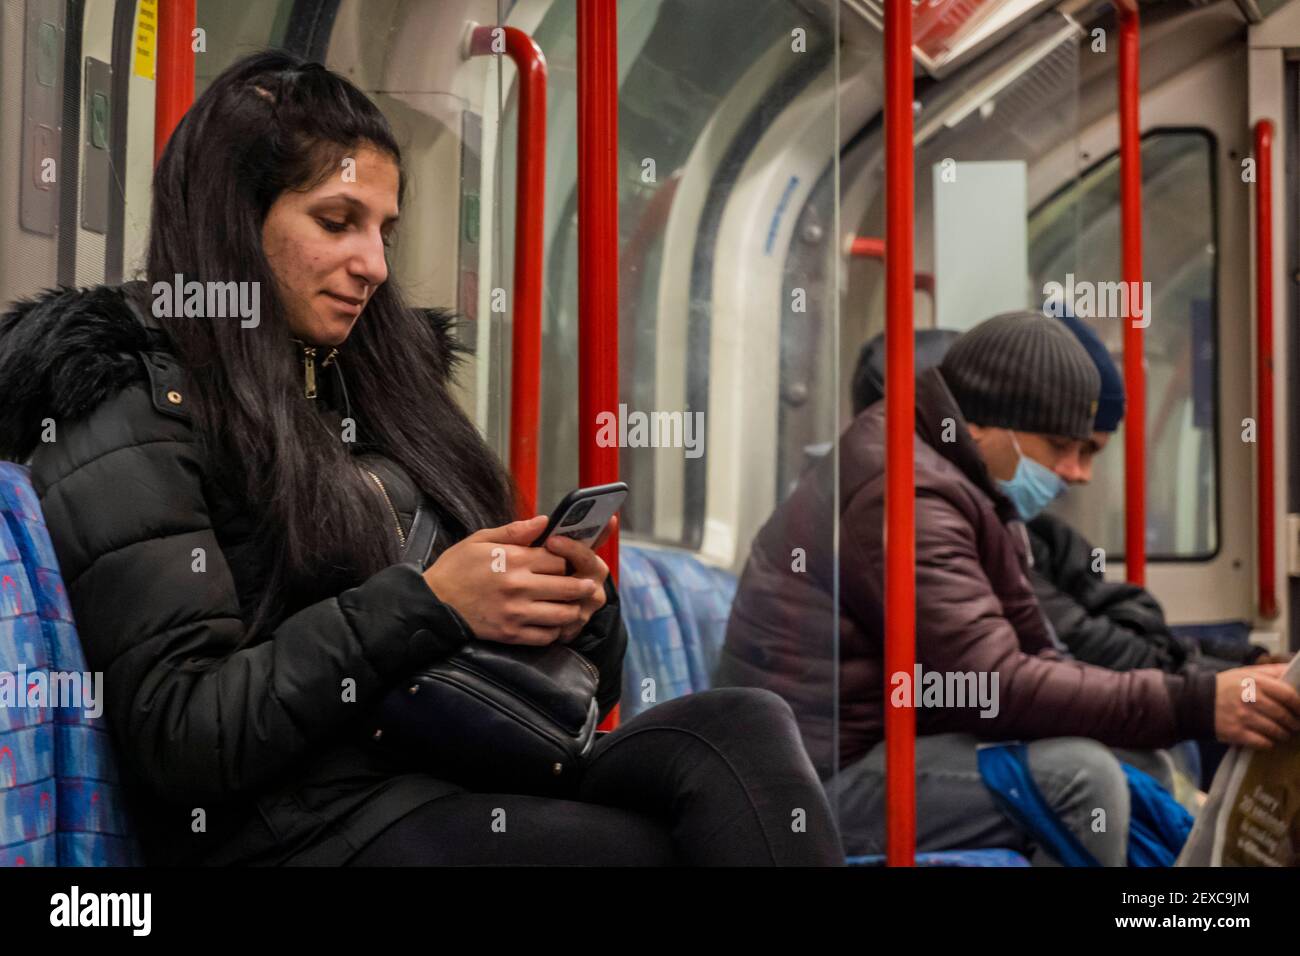 London, UK. 04th Mar, 2021. Most travellers wear masks, as they are mandatory, but plenty do not, for reasons oly known to themselves - The underground is still fairly busy despite the new national Lockdown, Stay at Home, instructions. Credit: Guy Bell/Alamy Live News Stock Photo